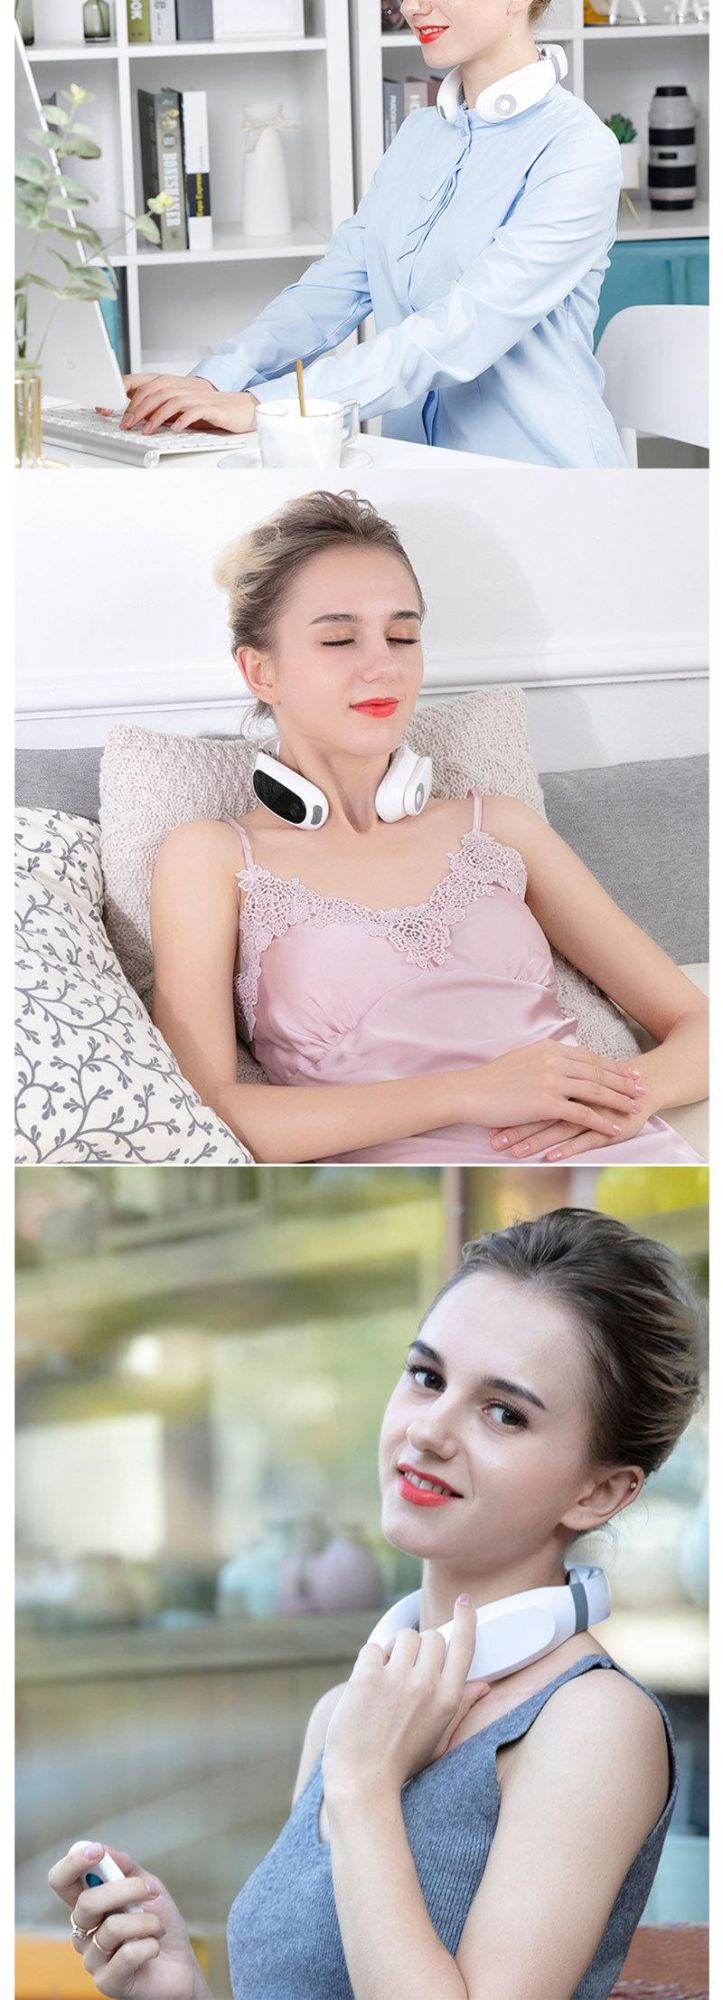 Health Care Wireless Intelligent Infrared Therapy Hot Compress Comfortable Neck Care Massager